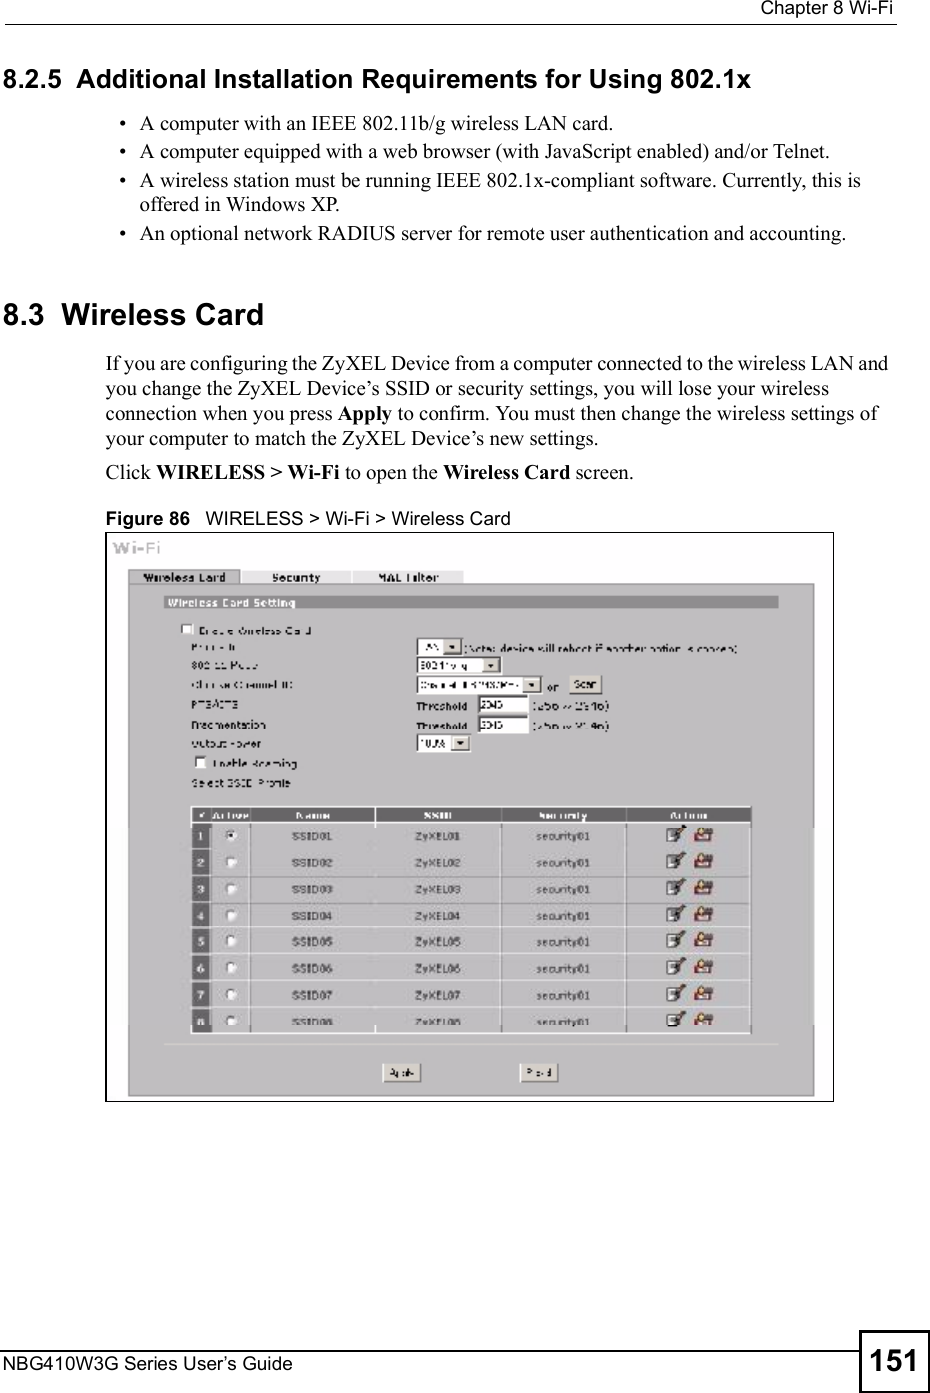  Chapter 8Wi-FiNBG410W3G Series User s Guide 1518.2.5  Additional Installation Requirements for Using 802.1x A computer with an IEEE 802.11b/g wireless LAN card.  A computer equipped with a web browser (with JavaScript enabled) and/or Telnet. A wireless station must be running IEEE 802.1x-compliant software. Currently, this is offered in Windows XP.  An optional network RADIUS server for remote user authentication and accounting.8.3  Wireless Card If you are configuring the ZyXEL Device from a computer connected to the wireless LAN and you change the ZyXEL Device!s SSID or security settings, you will lose your wireless connection when you press Apply to confirm. You must then change the wireless settings of your computer to match the ZyXEL Device!s new settings.Click WIRELESS &gt; Wi-Fi to open the Wireless Card screen.Figure 86   WIRELESS &gt; Wi-Fi &gt; Wireless Card 